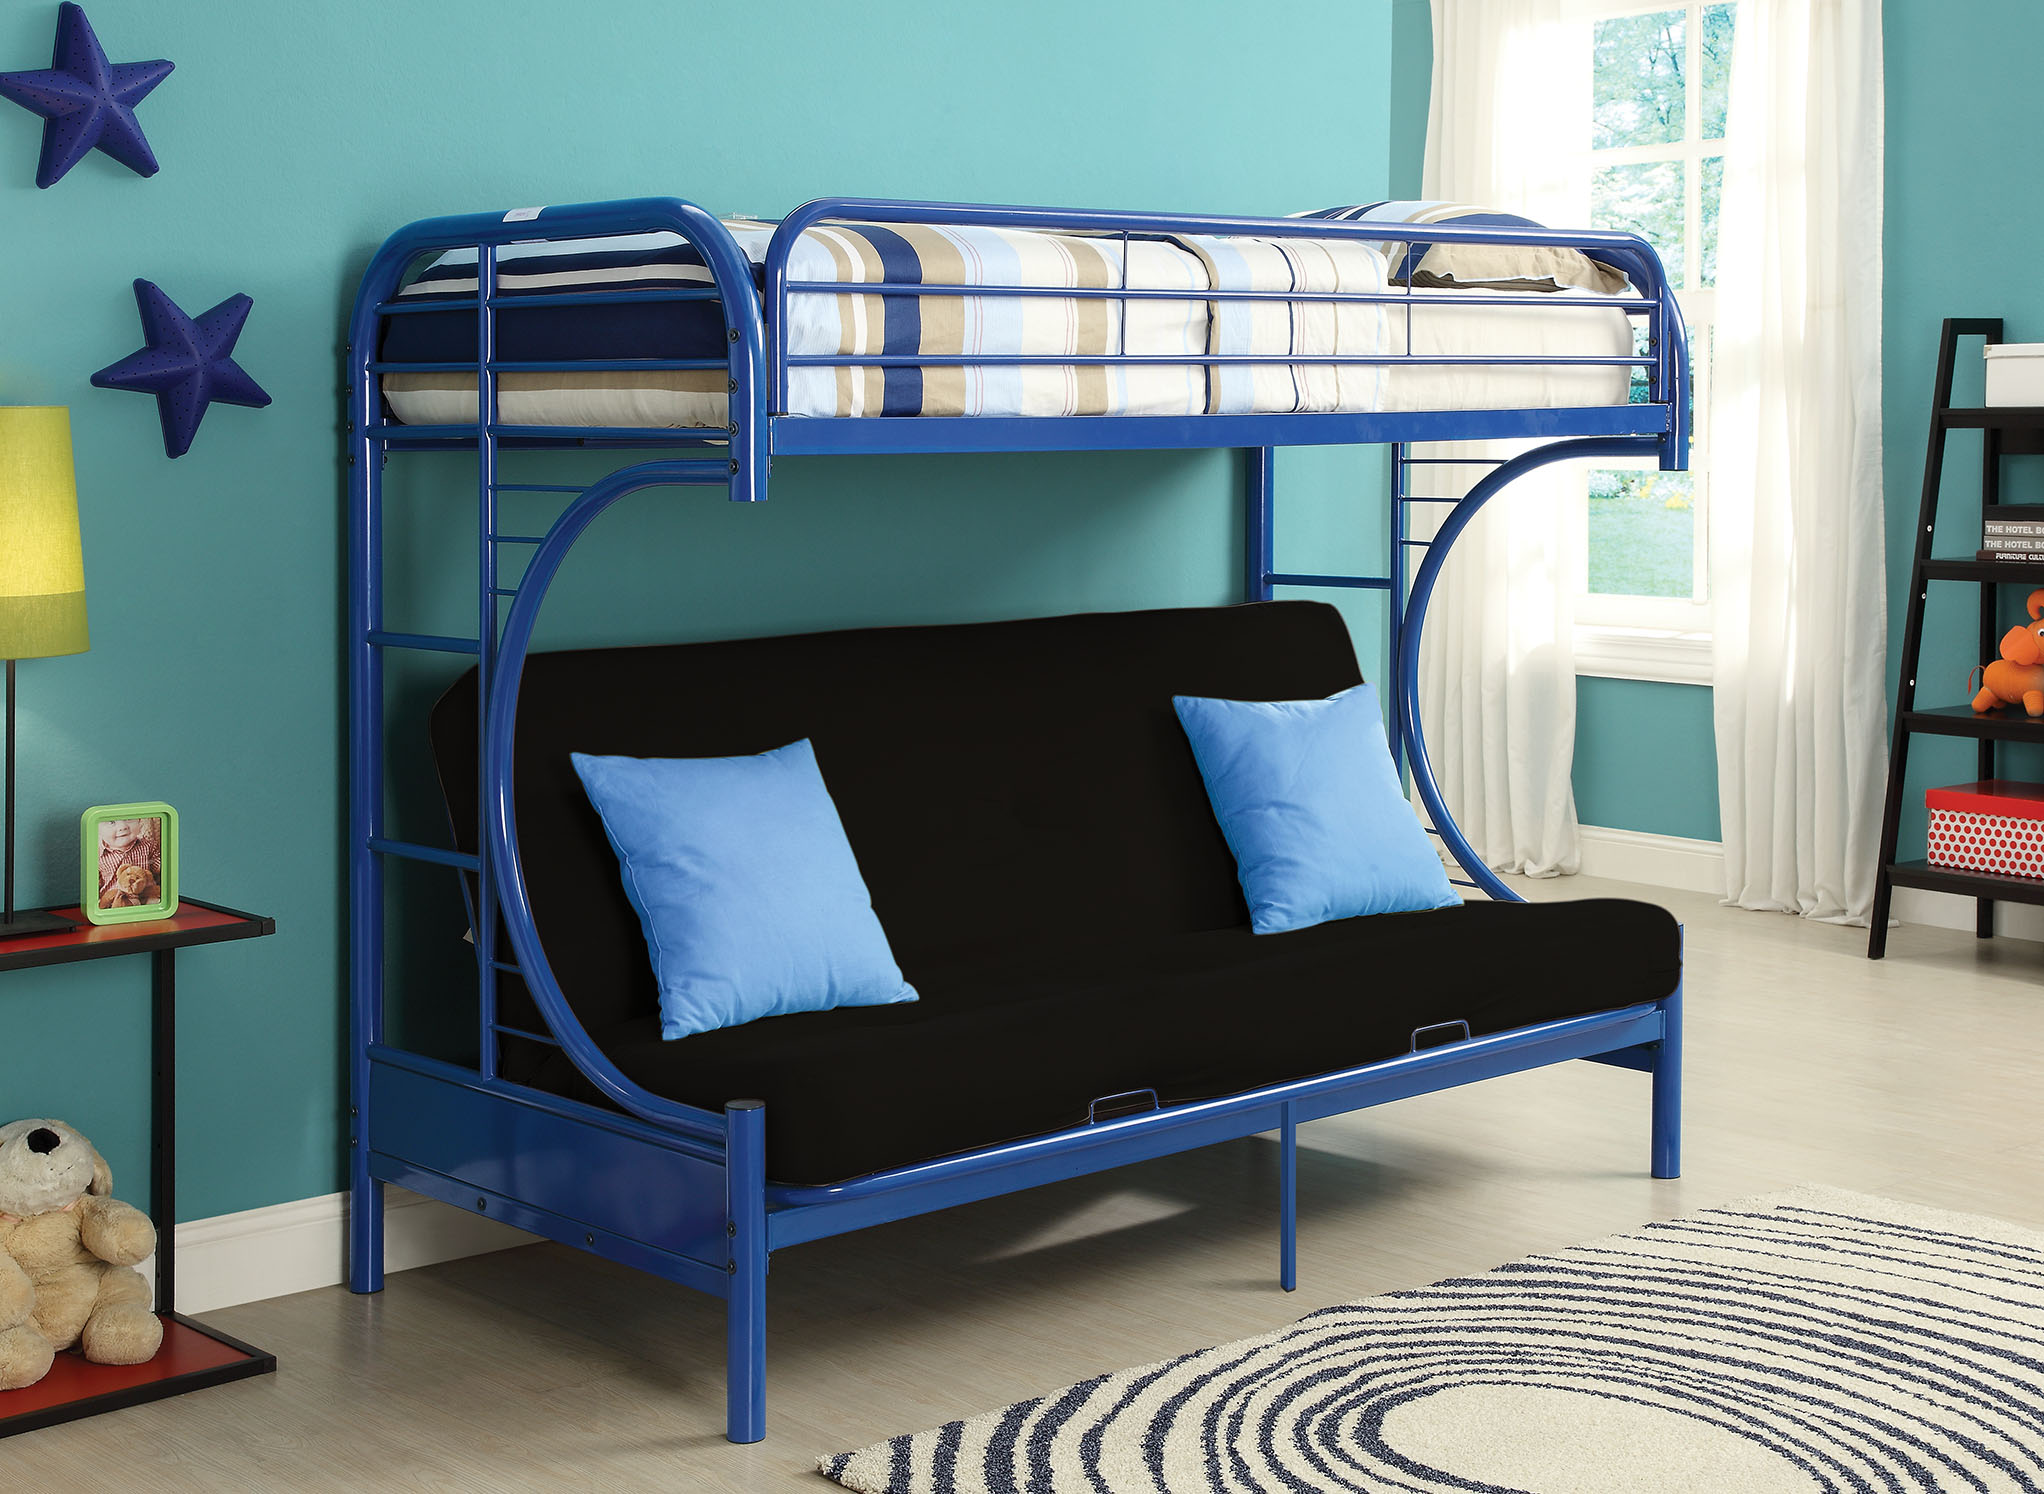 78" X 41" X 65" Twin Over Full Navy Metal Tube Futon Bunk Bed